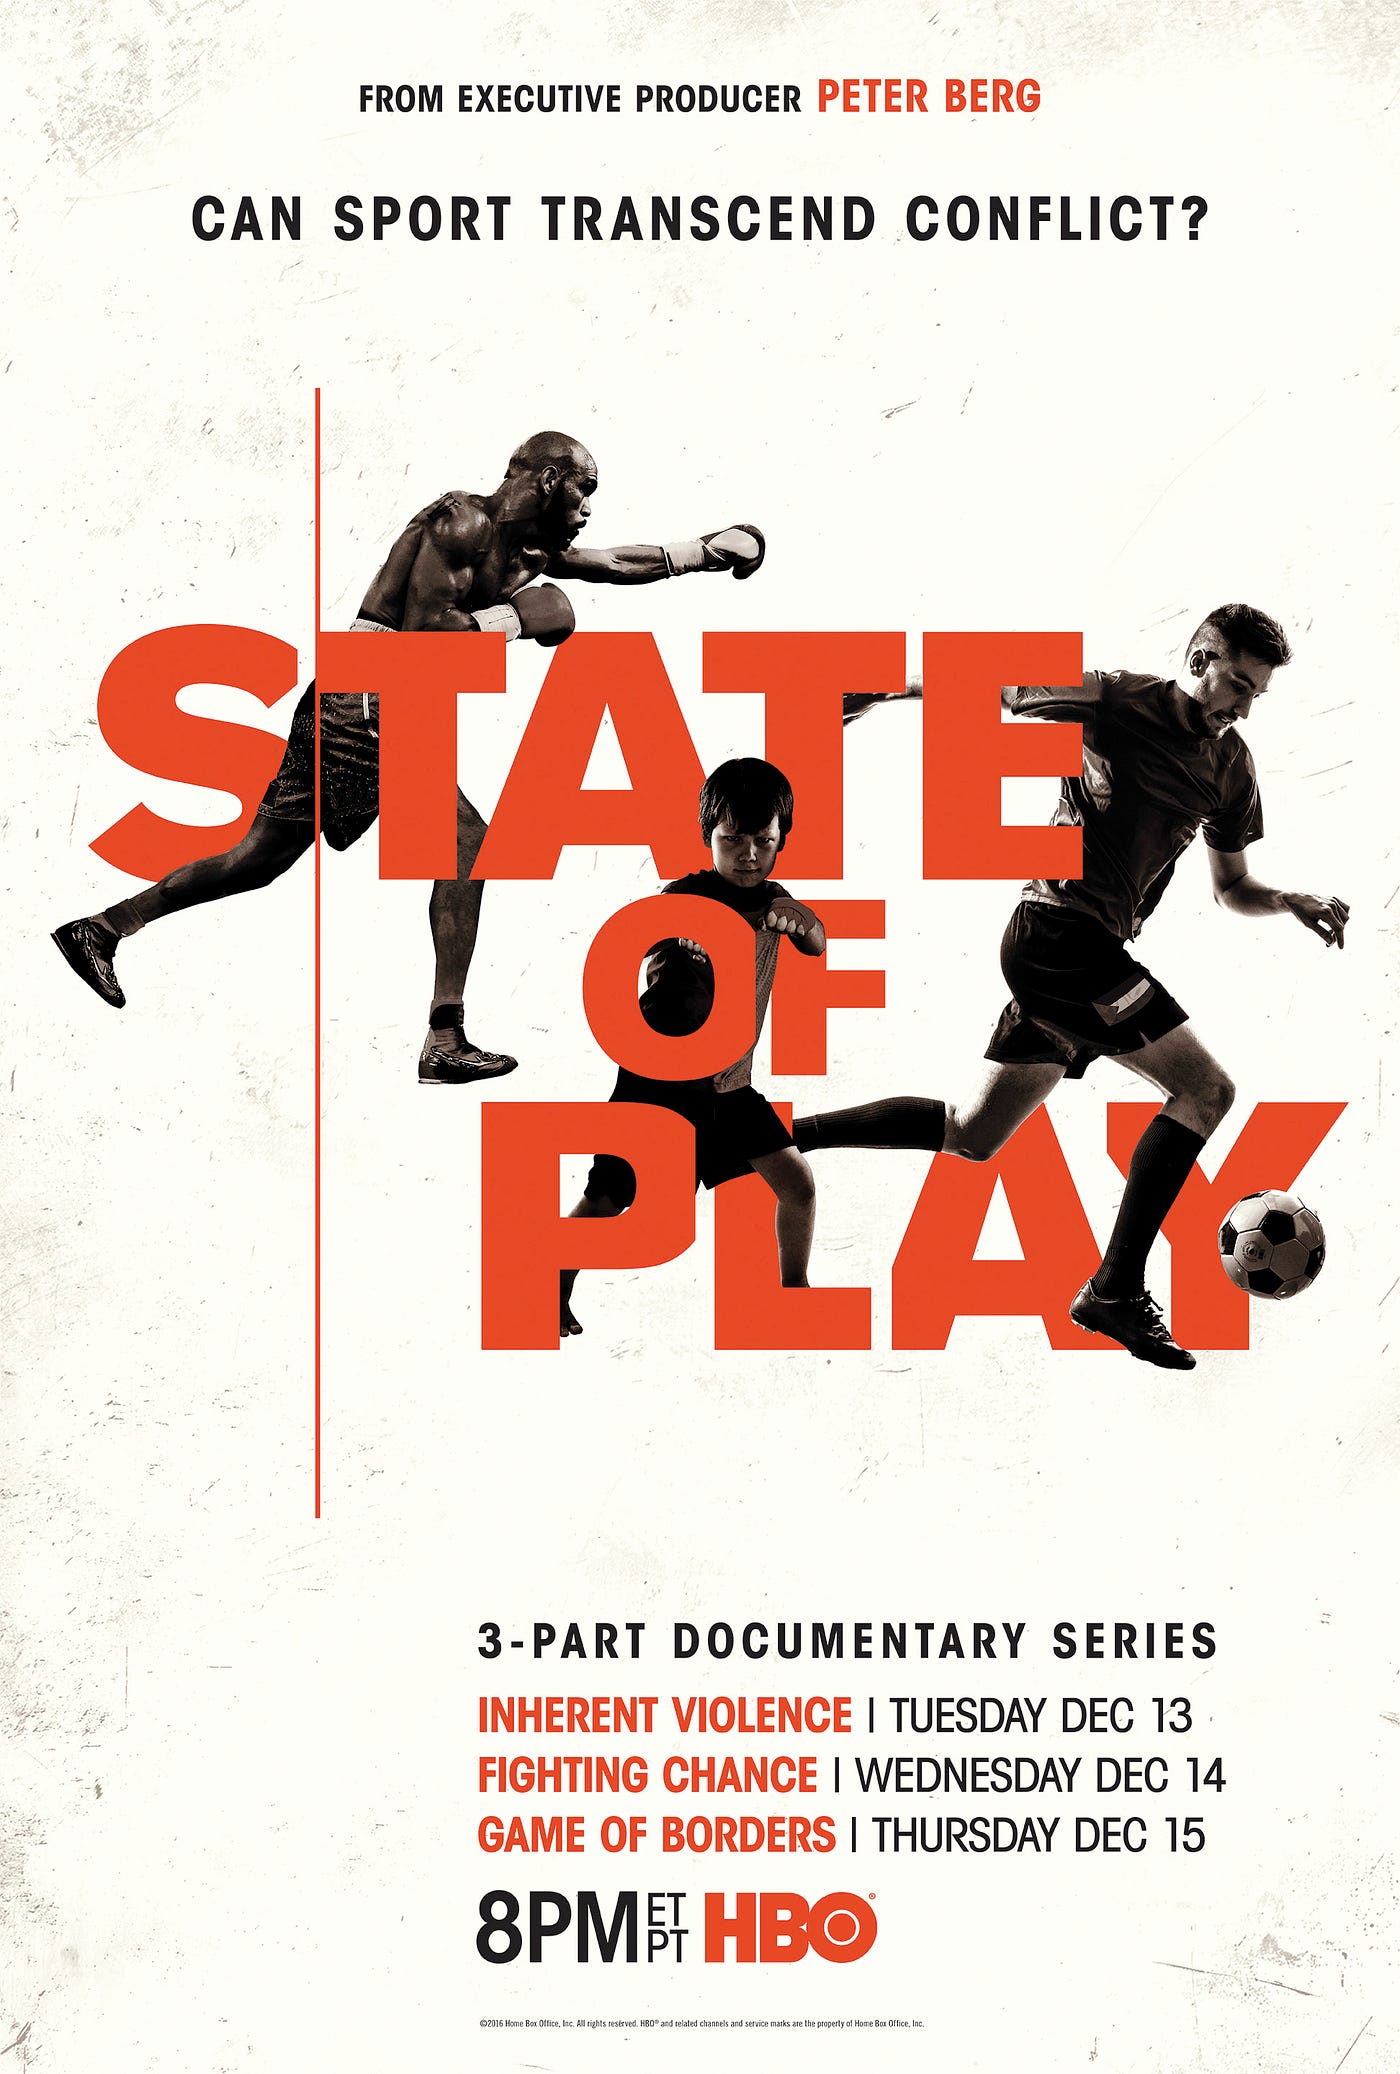 HBO SPORTS® PRESENTS NEW EDITIONS OF THE INNOVATIVE SERIES STATE OF PLAY, FROM ACCLAIMED FILMMAKER PETER BERG, ON THREE CONSECUTIVE NIGHTS STARTING TONIGHT by WarnerMedia Entertainment WarnerMedia Entertainment Medium